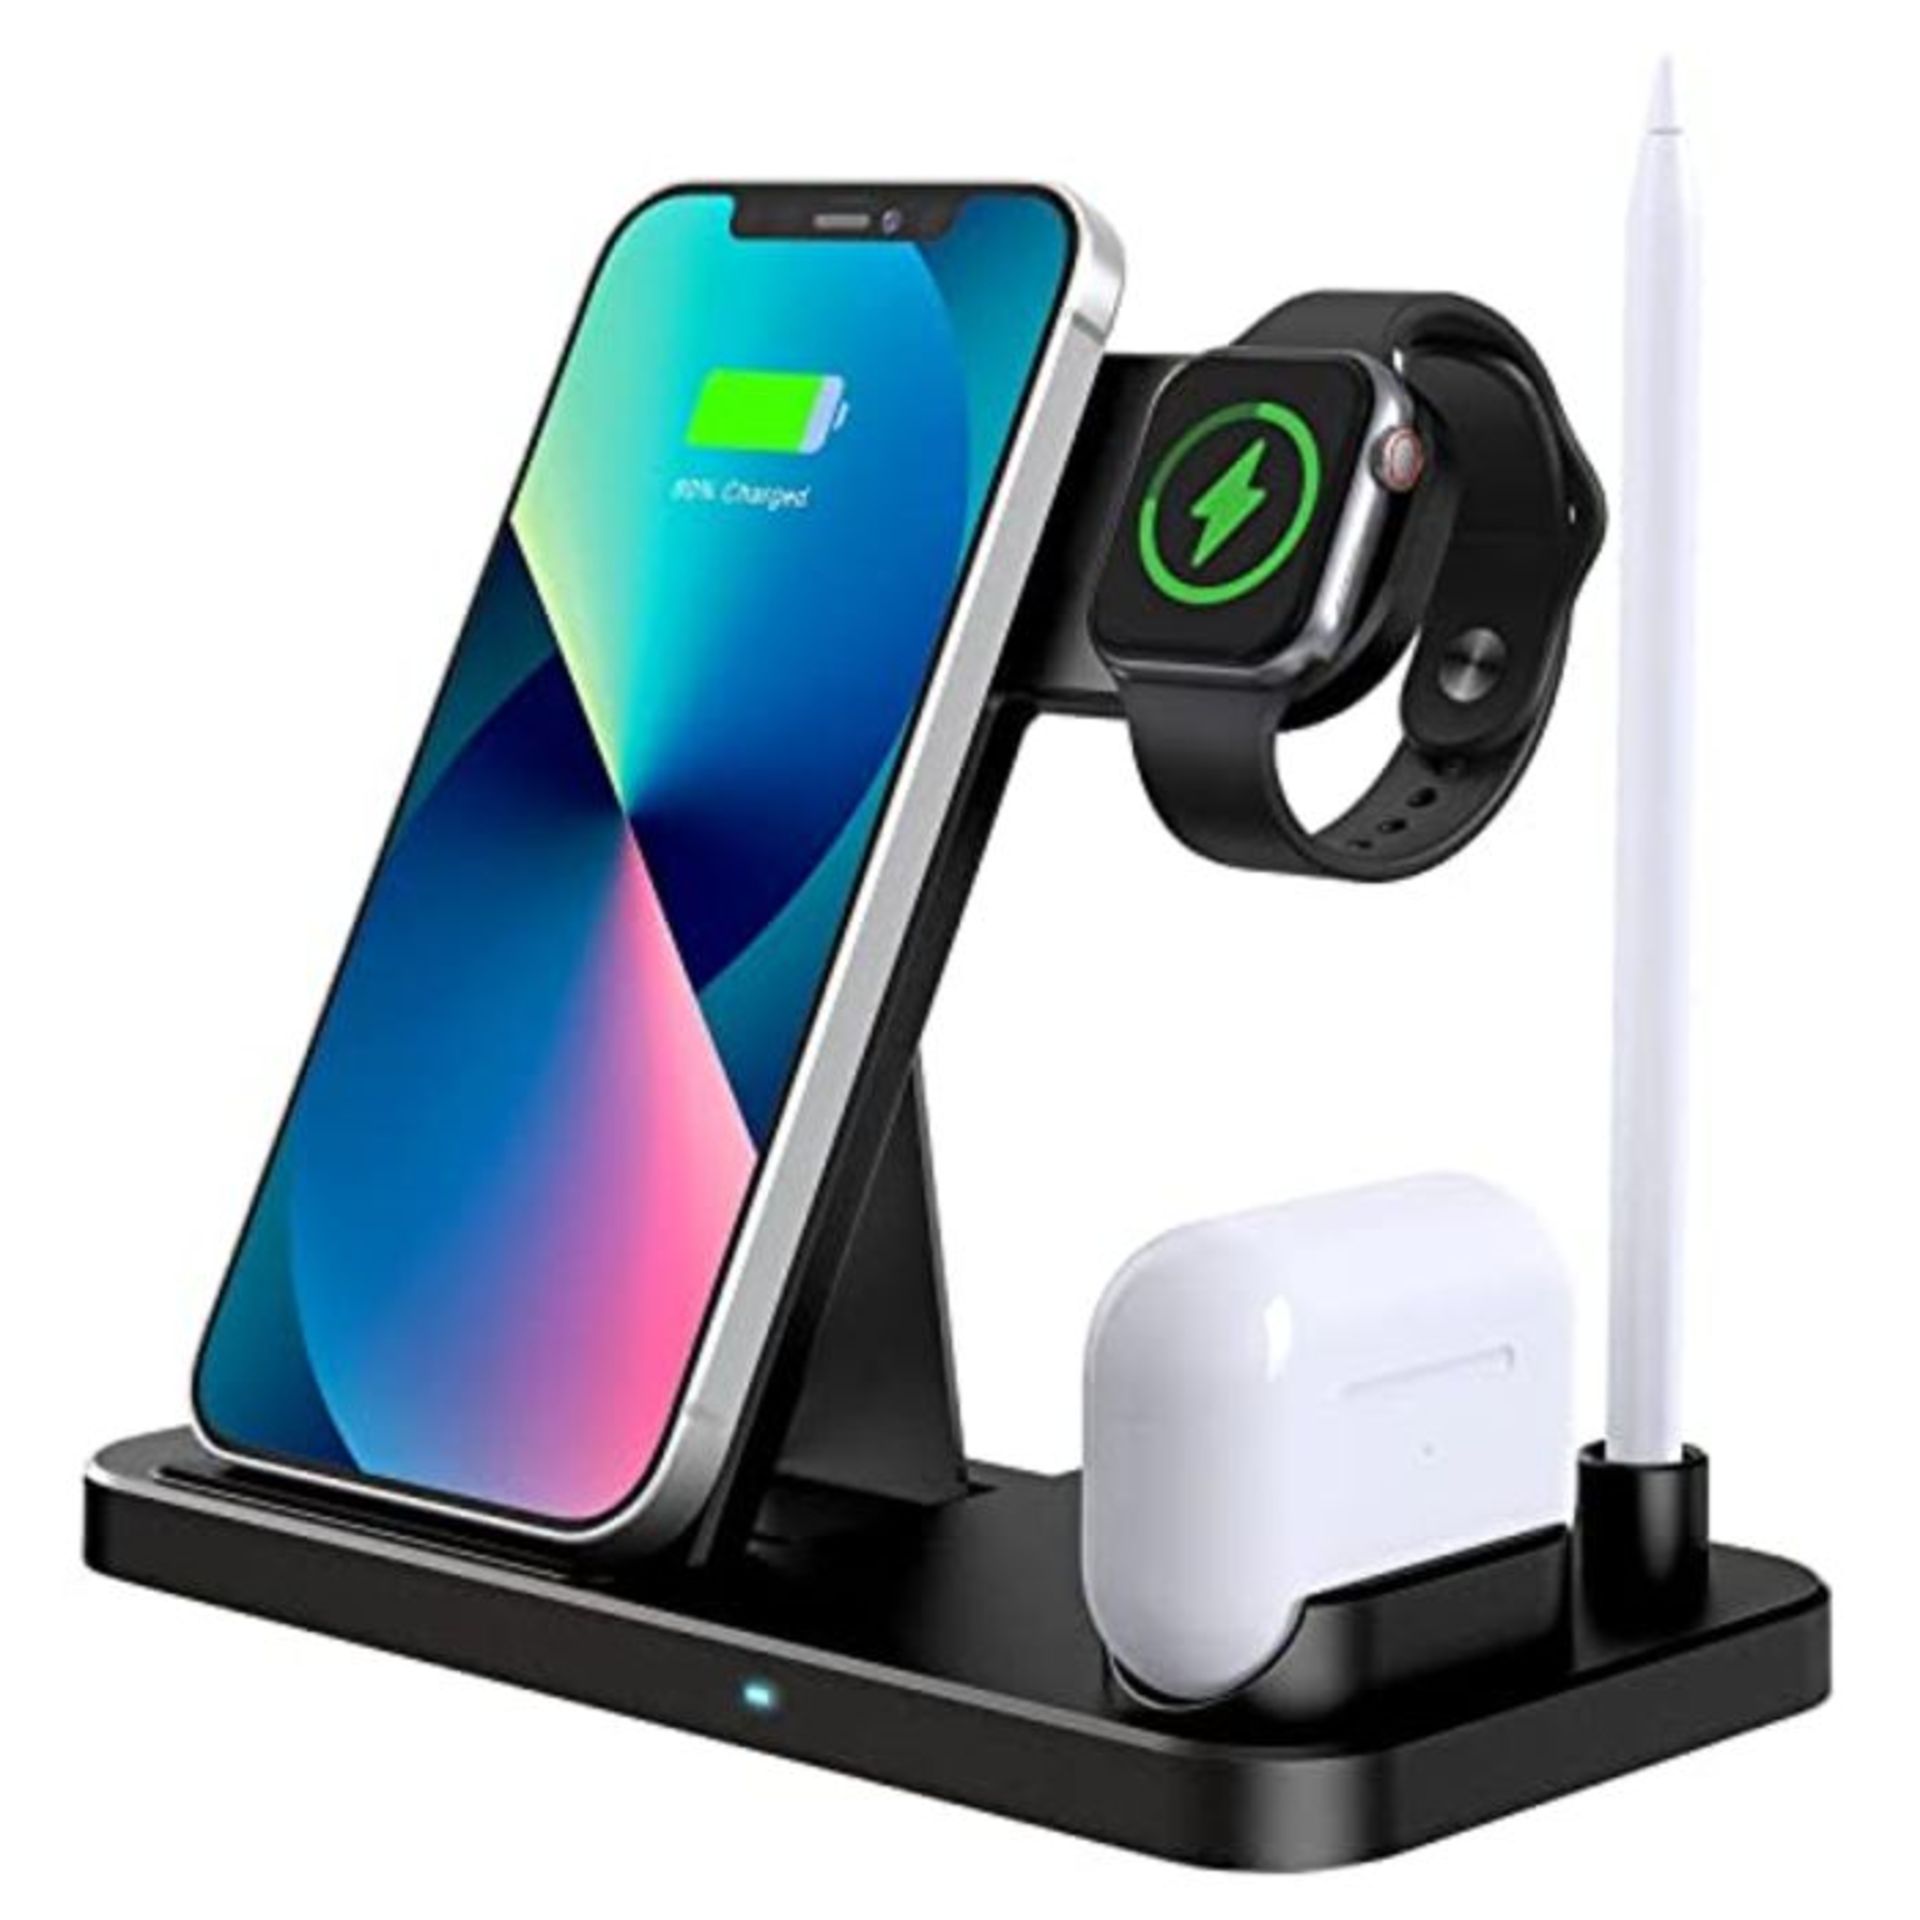 LECHLY Wireless Charger, 4 in 1 Induktive ladestation Kompatibel mit iPhone 13/12/12 P